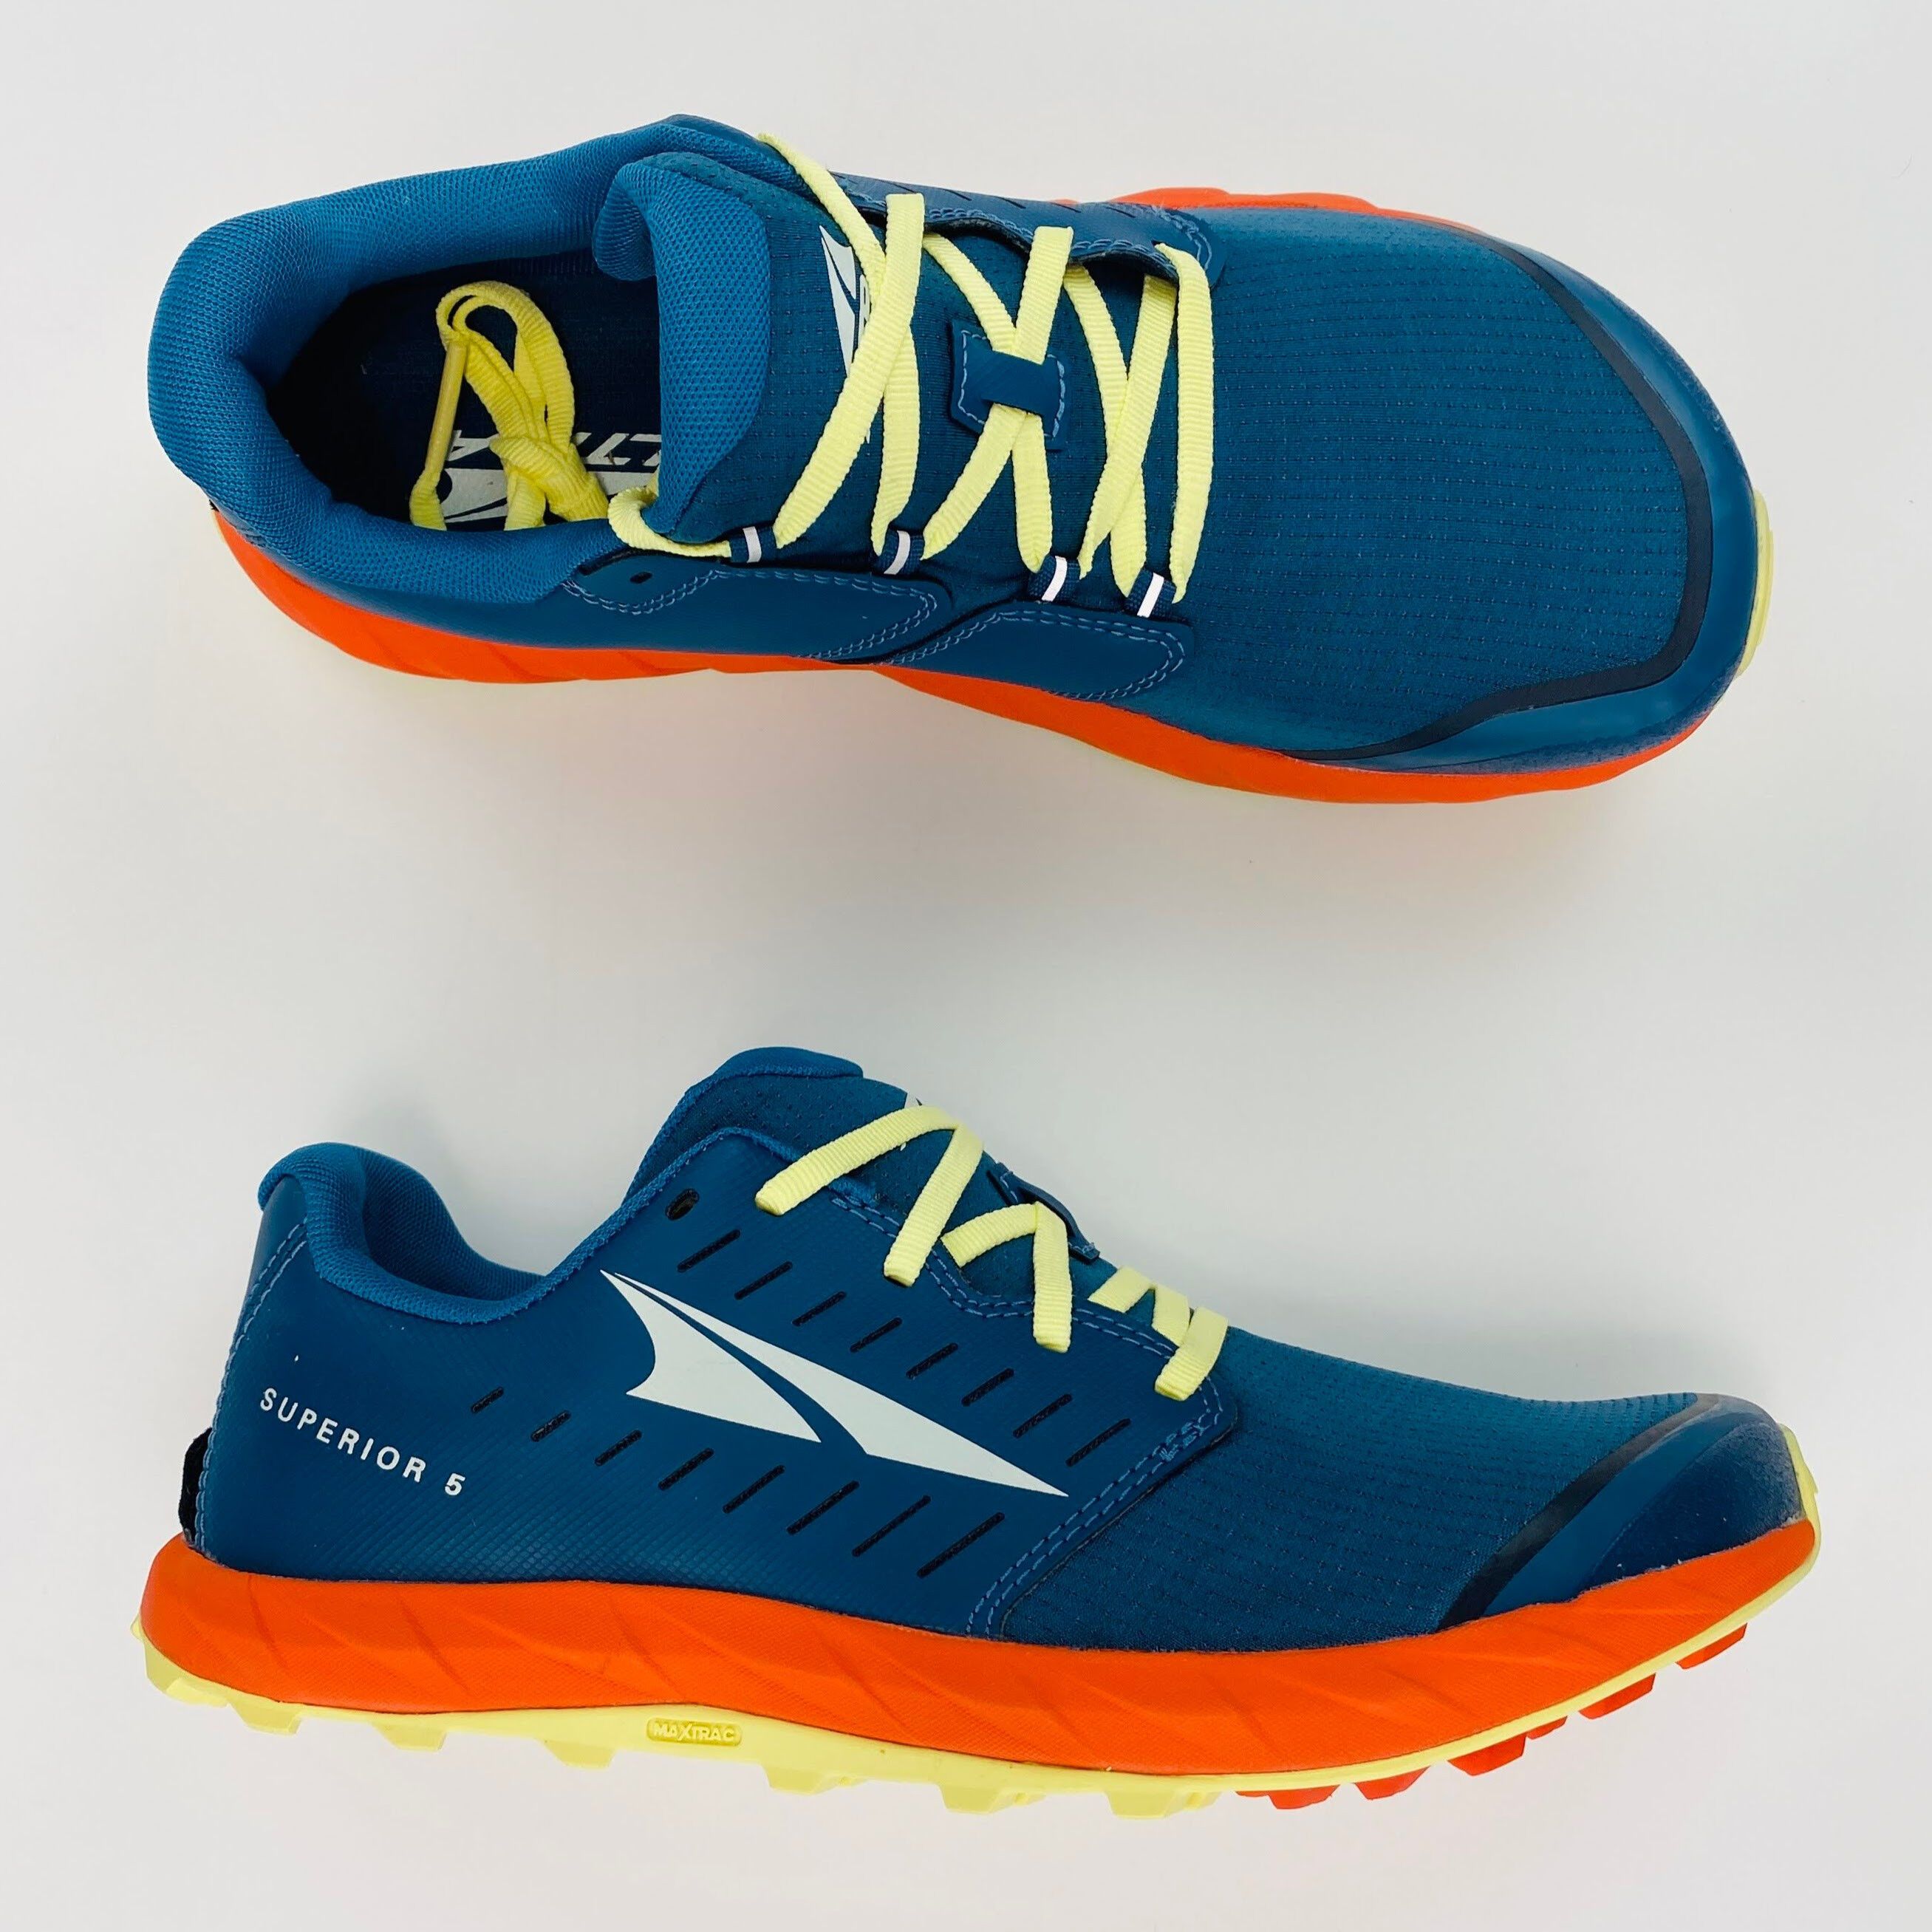 Altra M Superior 5 - Seconde main Chaussures trail homme - Bleu - 42.5 | Hardloop